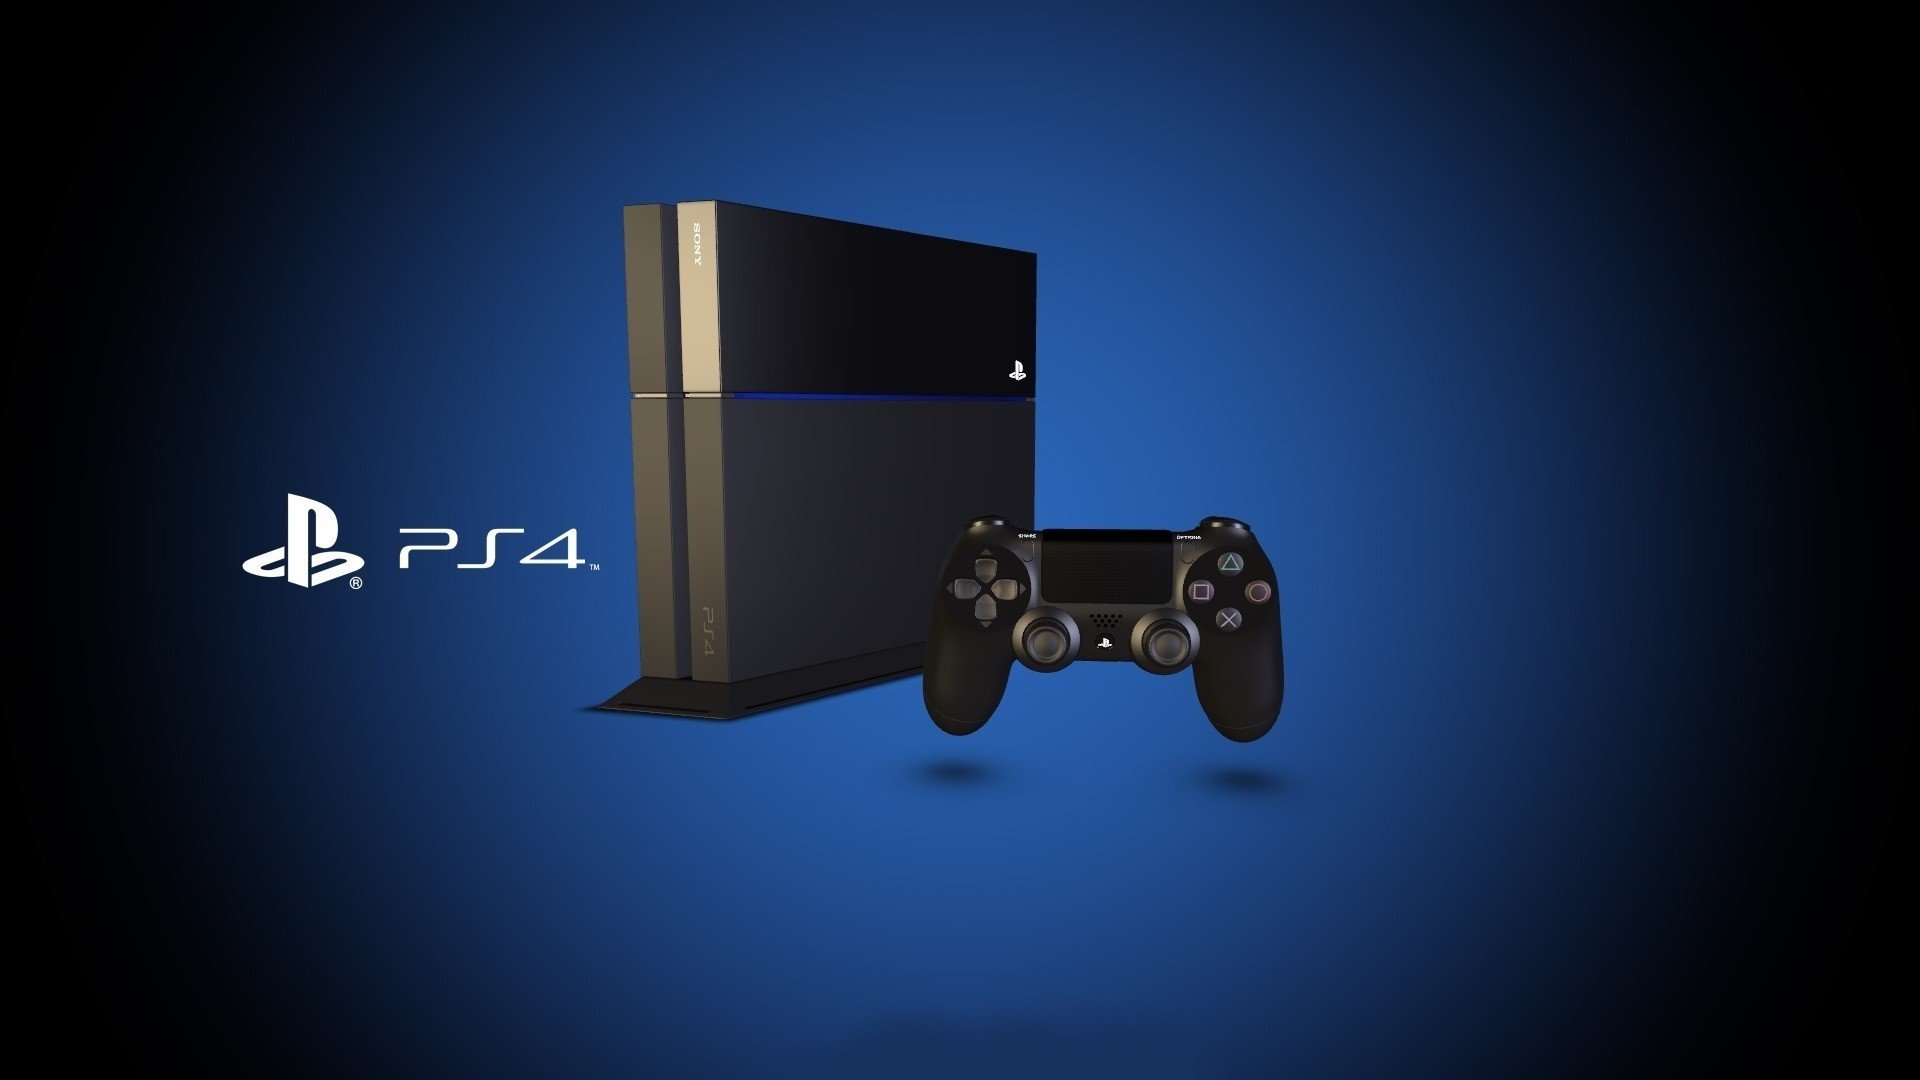 Wallpaper playstation 4 hi tech ps4 sony game console asiatic